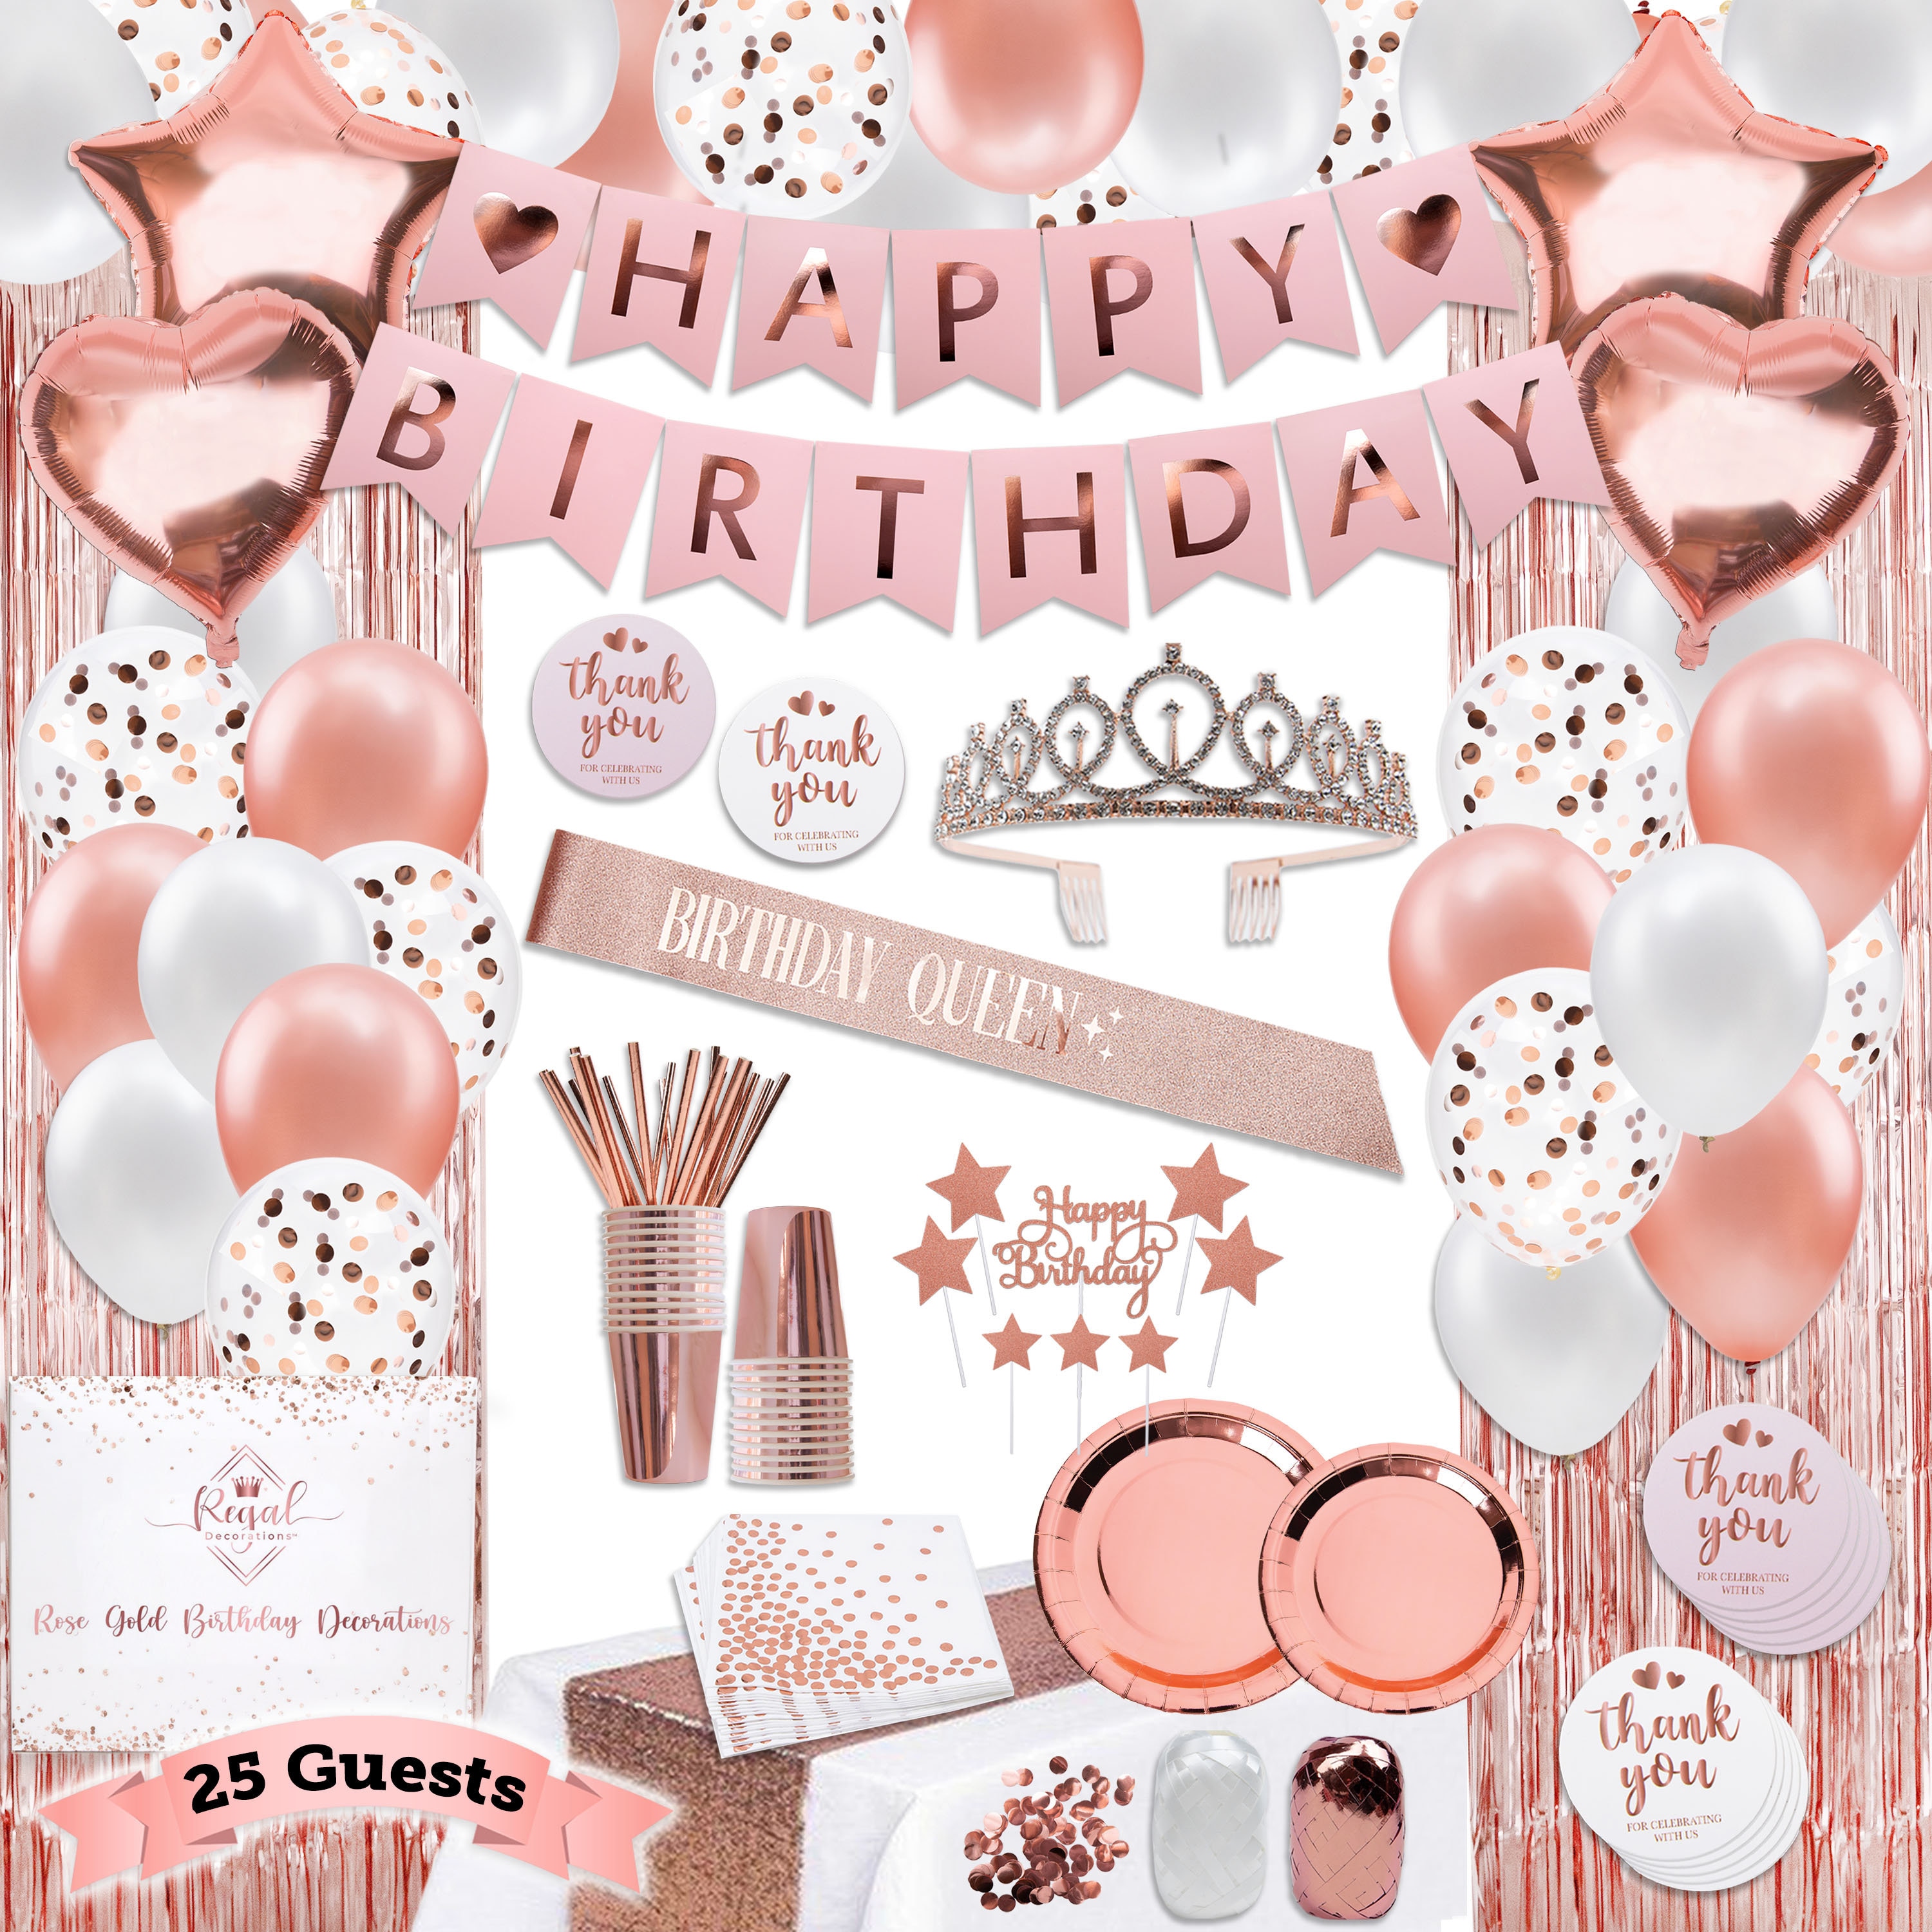 10th Birthday Decorations For Girls Glitter Rose Gold Happy Cake Topper NEW